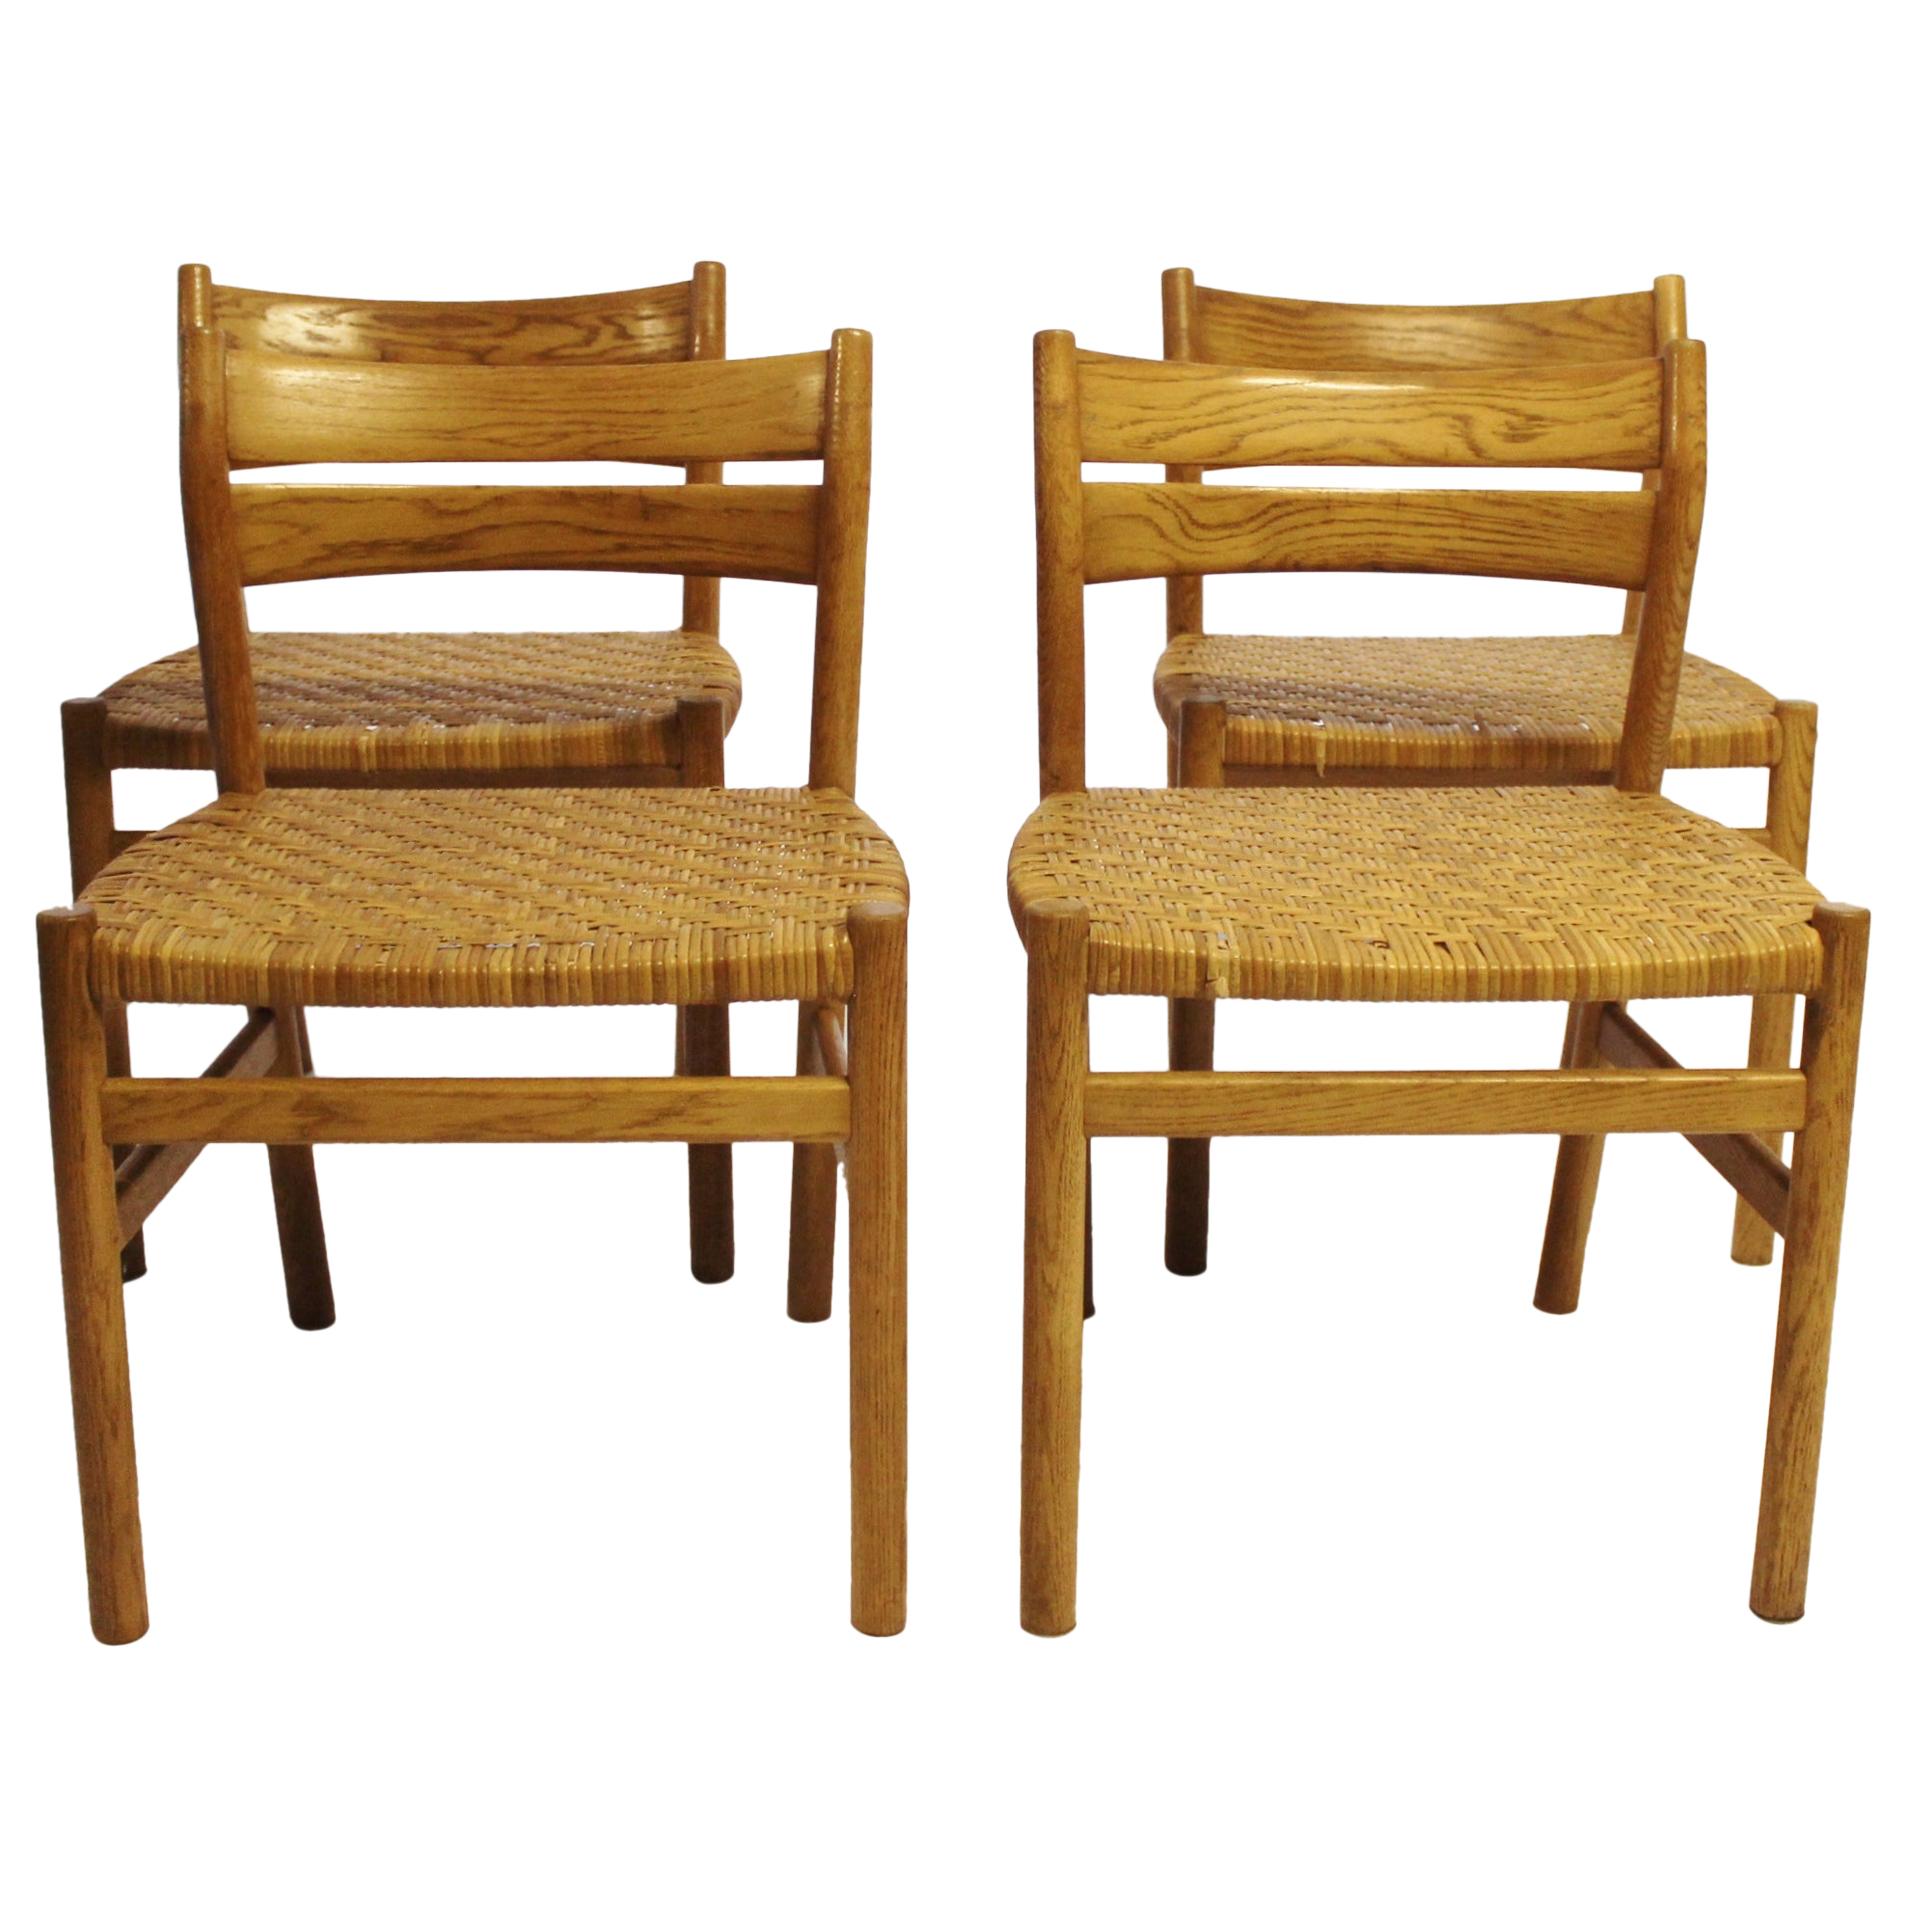 Set of Four Dining Room Chairs in Oak, of Danish Design, 1960s